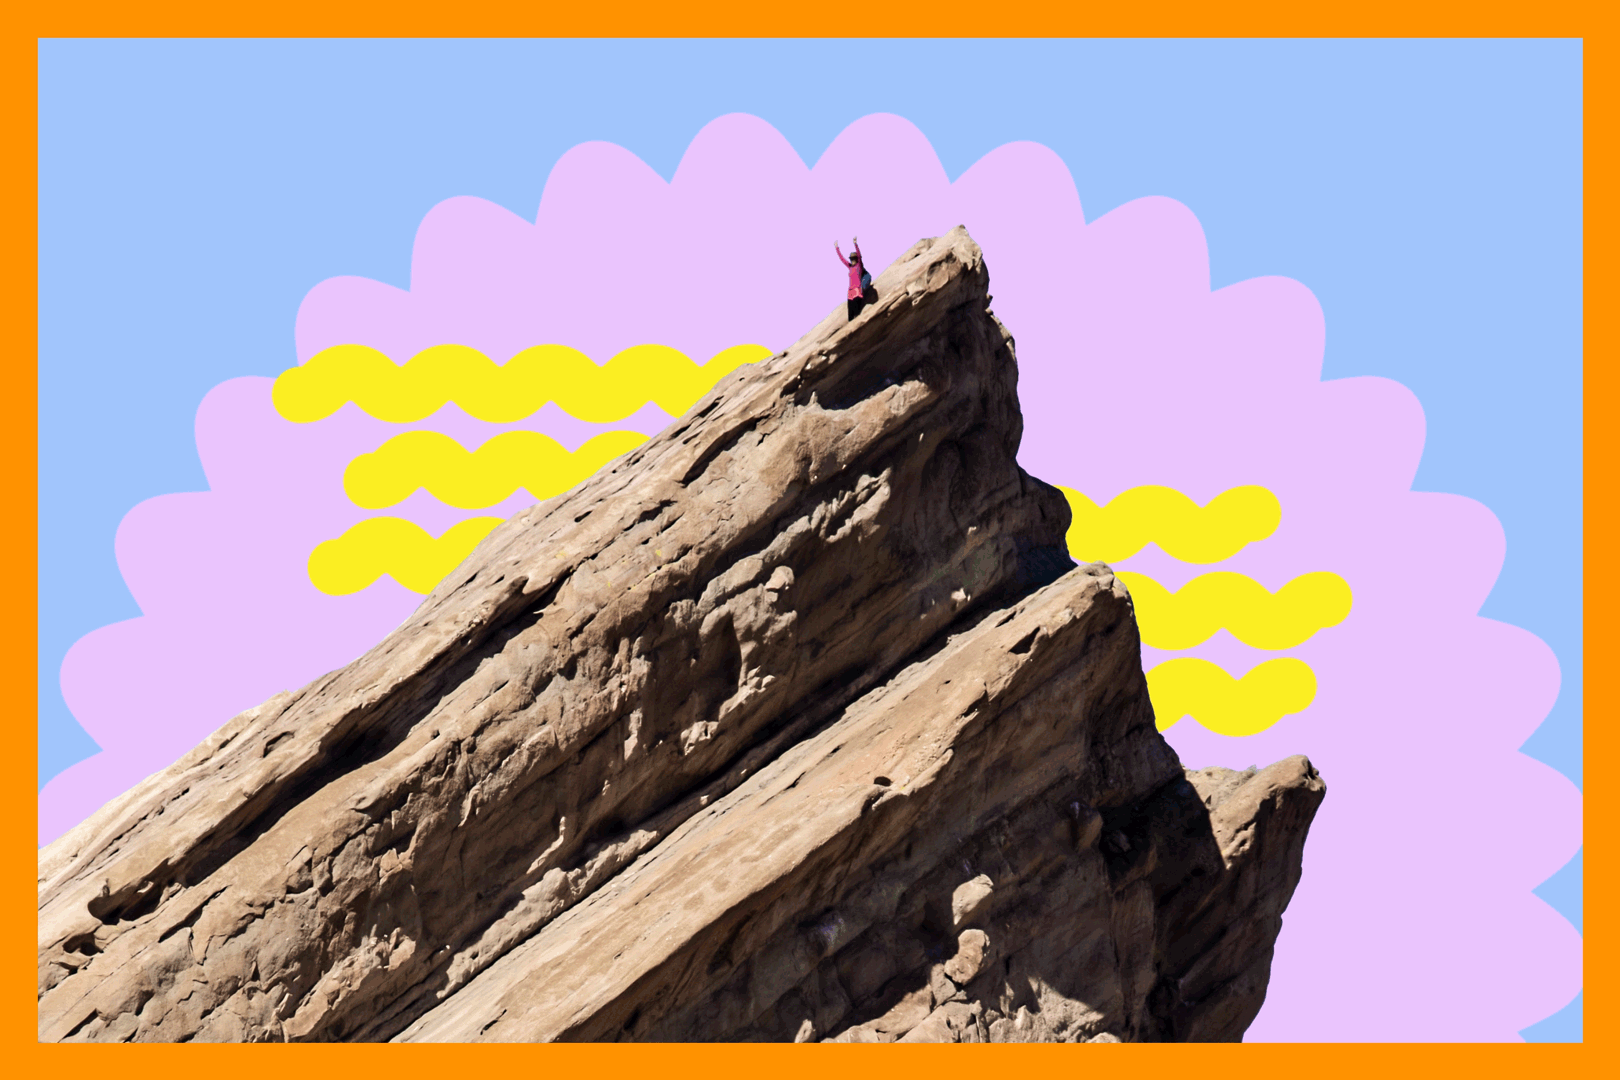 A hiker stands with hands raised at the top of a very pointy rock.